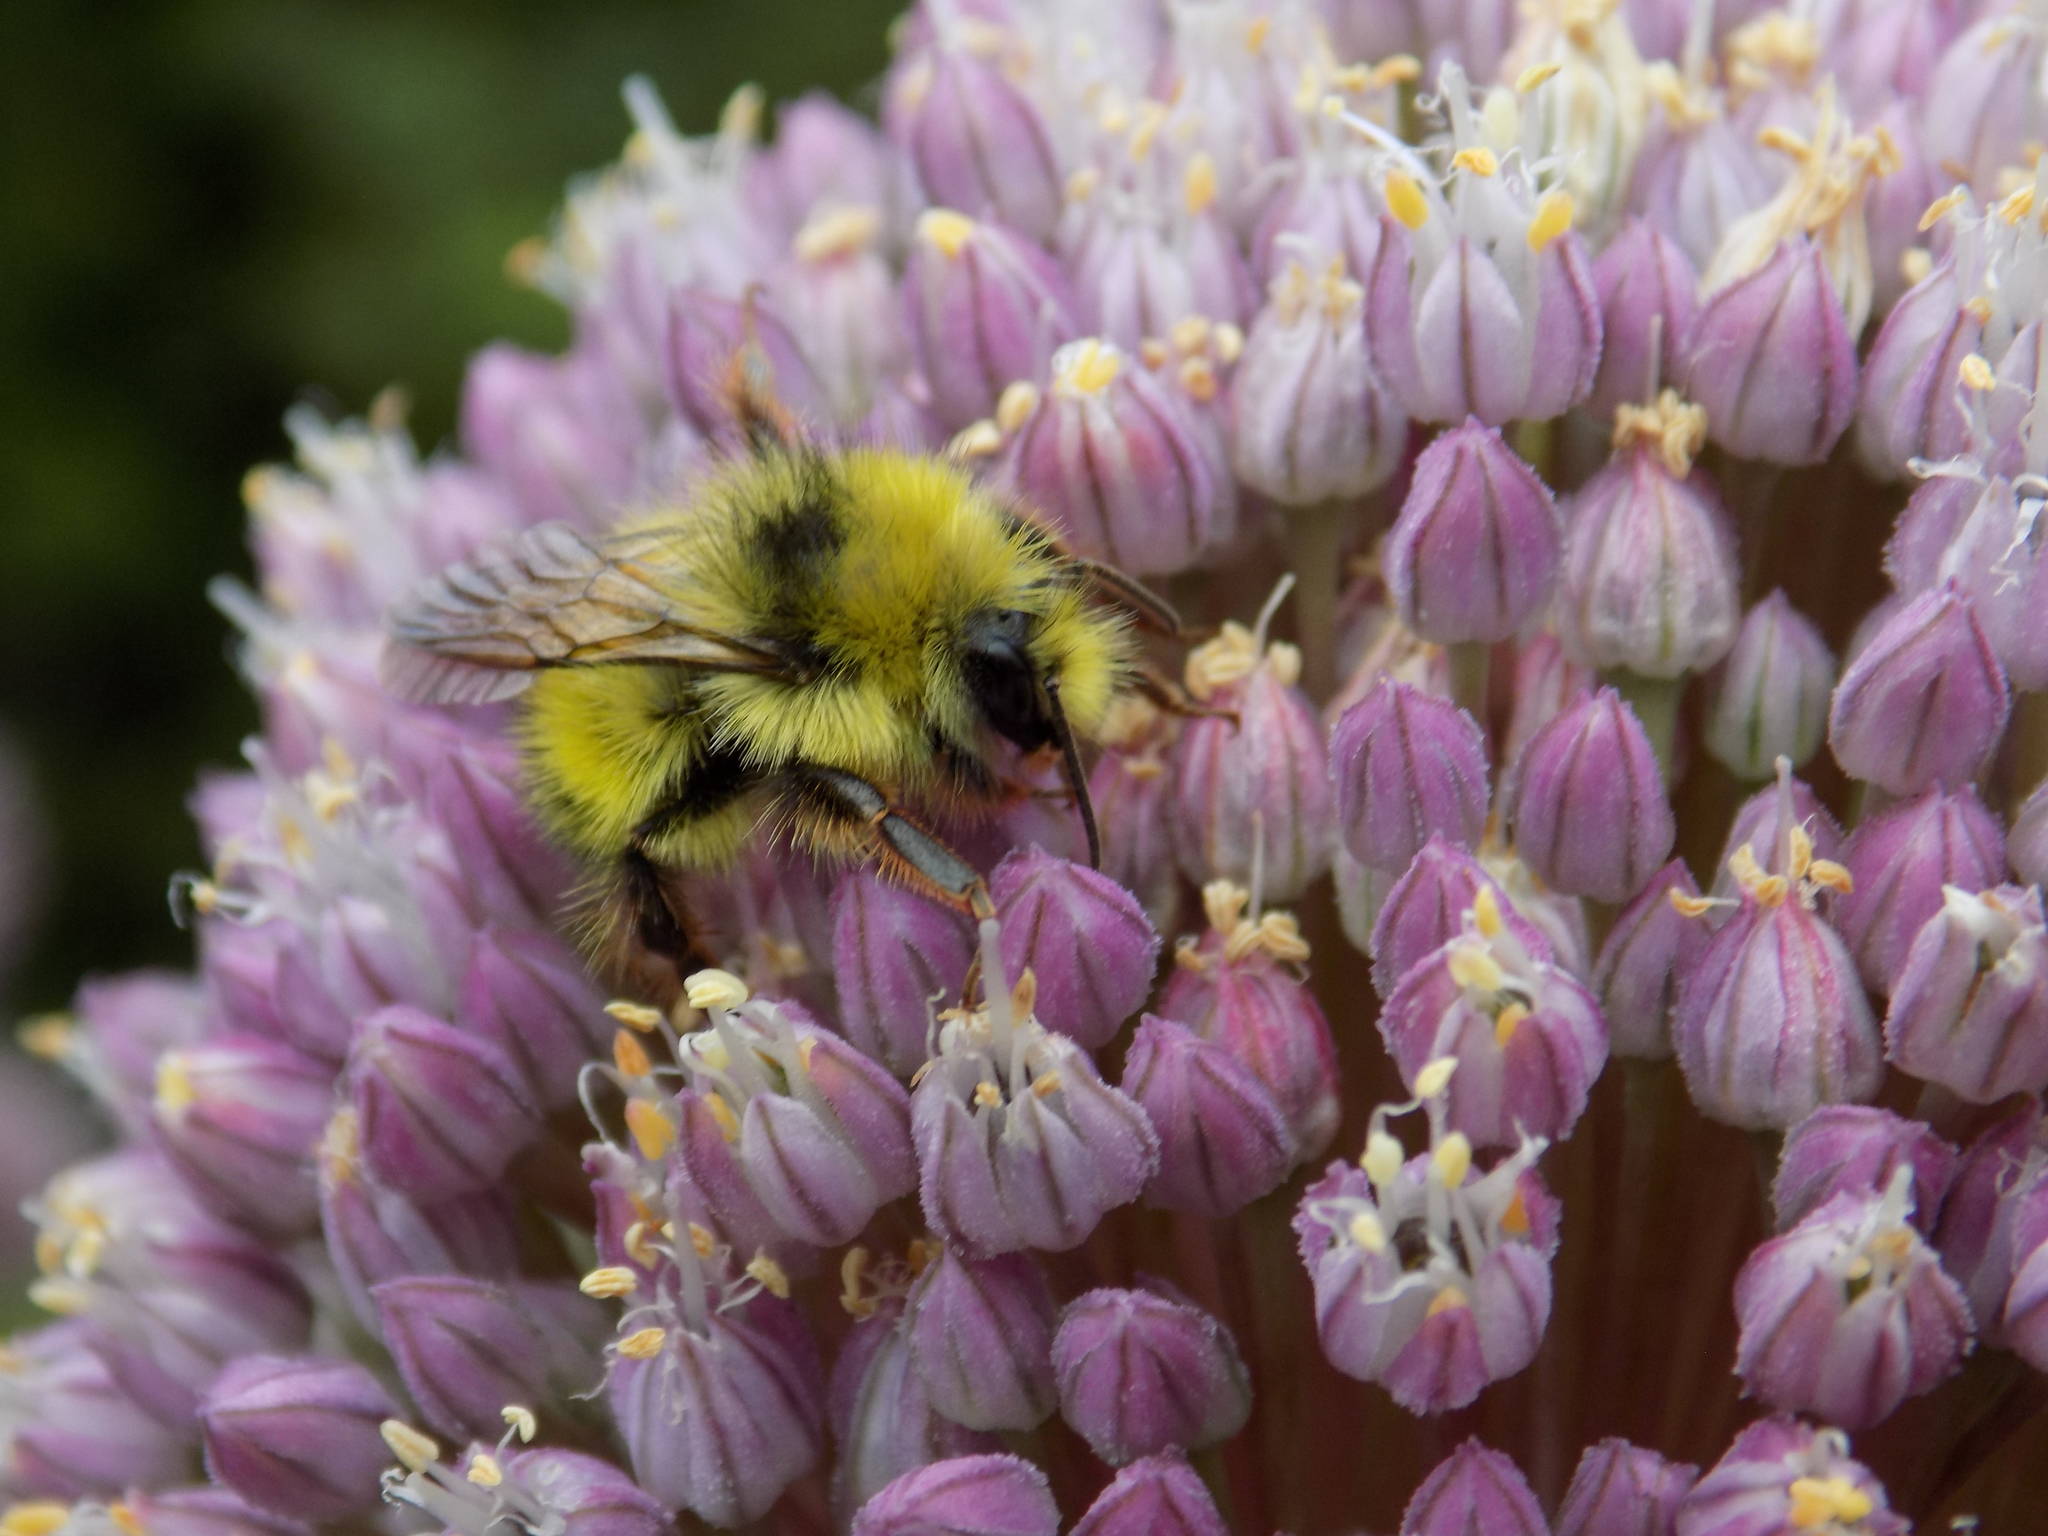 Honeybees can displace native bees | Guest Column